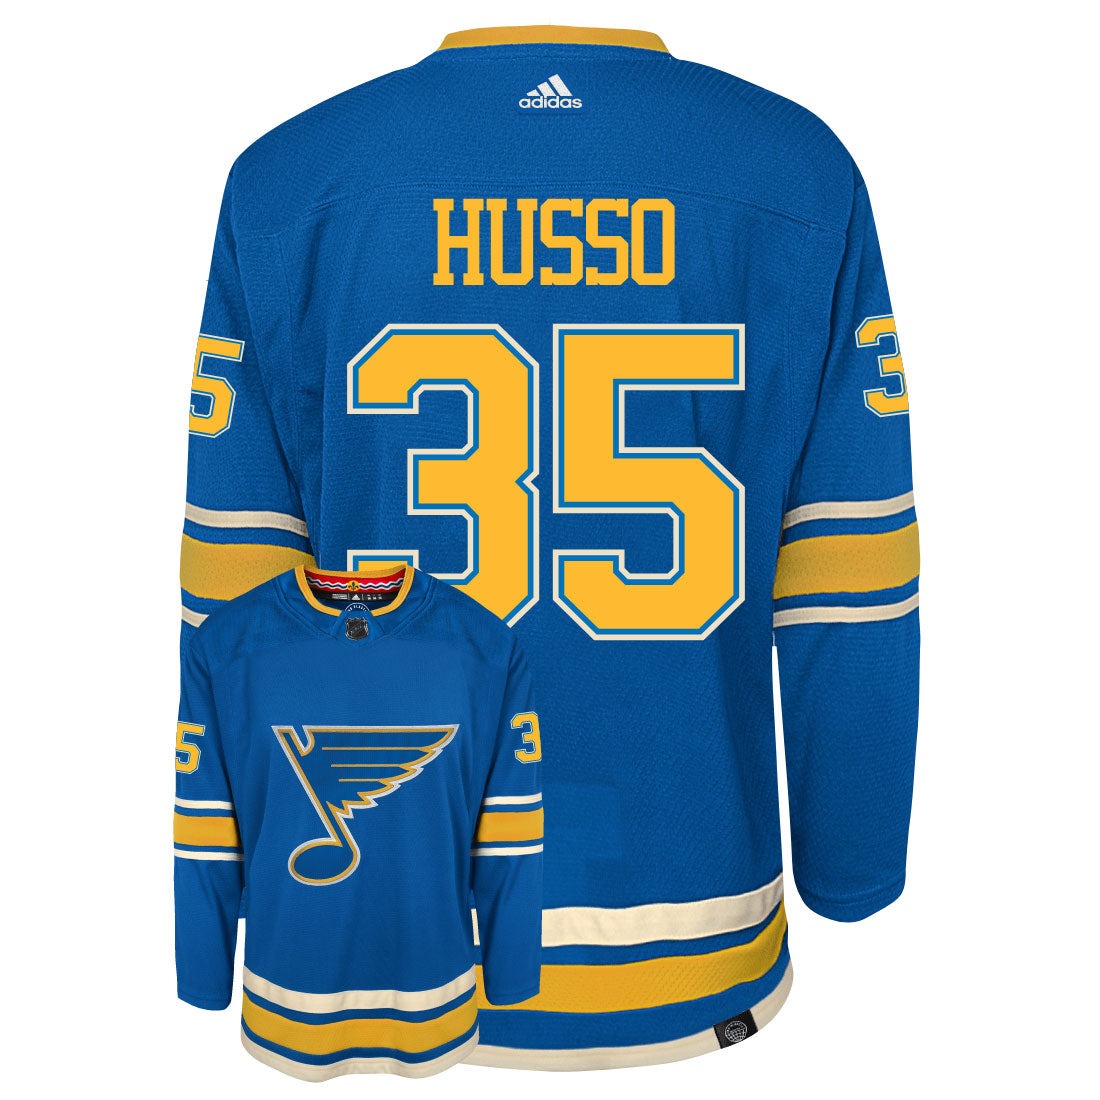 Ville Husso St Louis Blues Adidas Primegreen Authentic Third Alternate NHL Hockey Jersey - Back/Front View